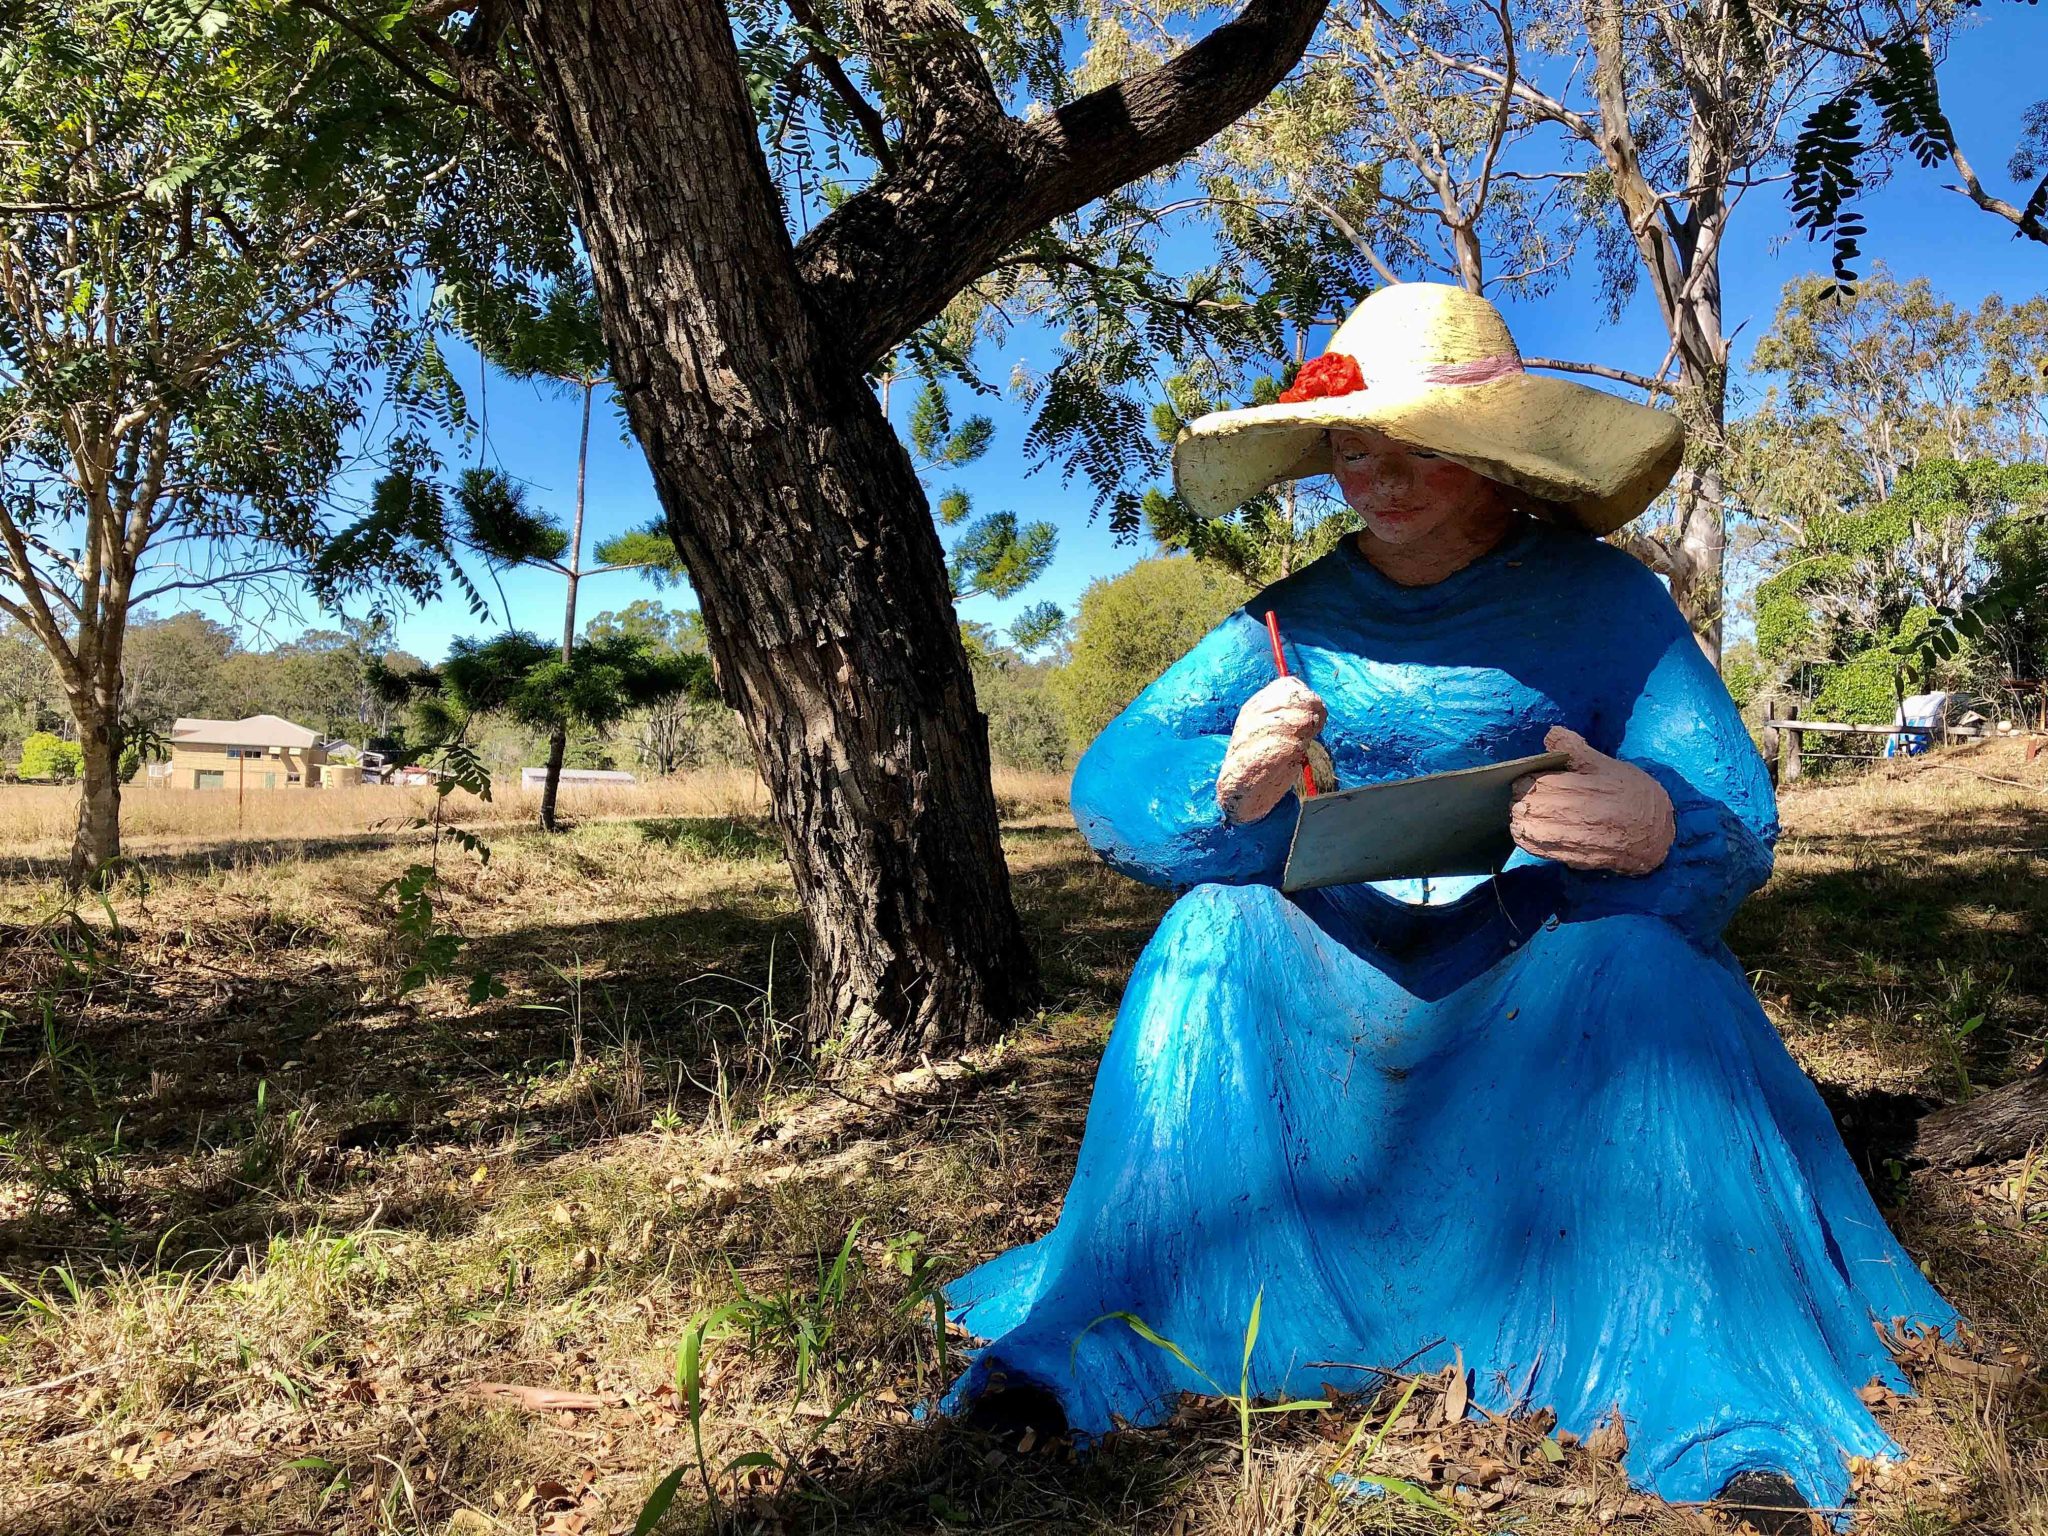 A “mystery woman” in a blue dress with pen and sketchpad in hand sits under a shady tree alongside the driveway into the property of Apple Tree Creek artist Alice McLaughlin.